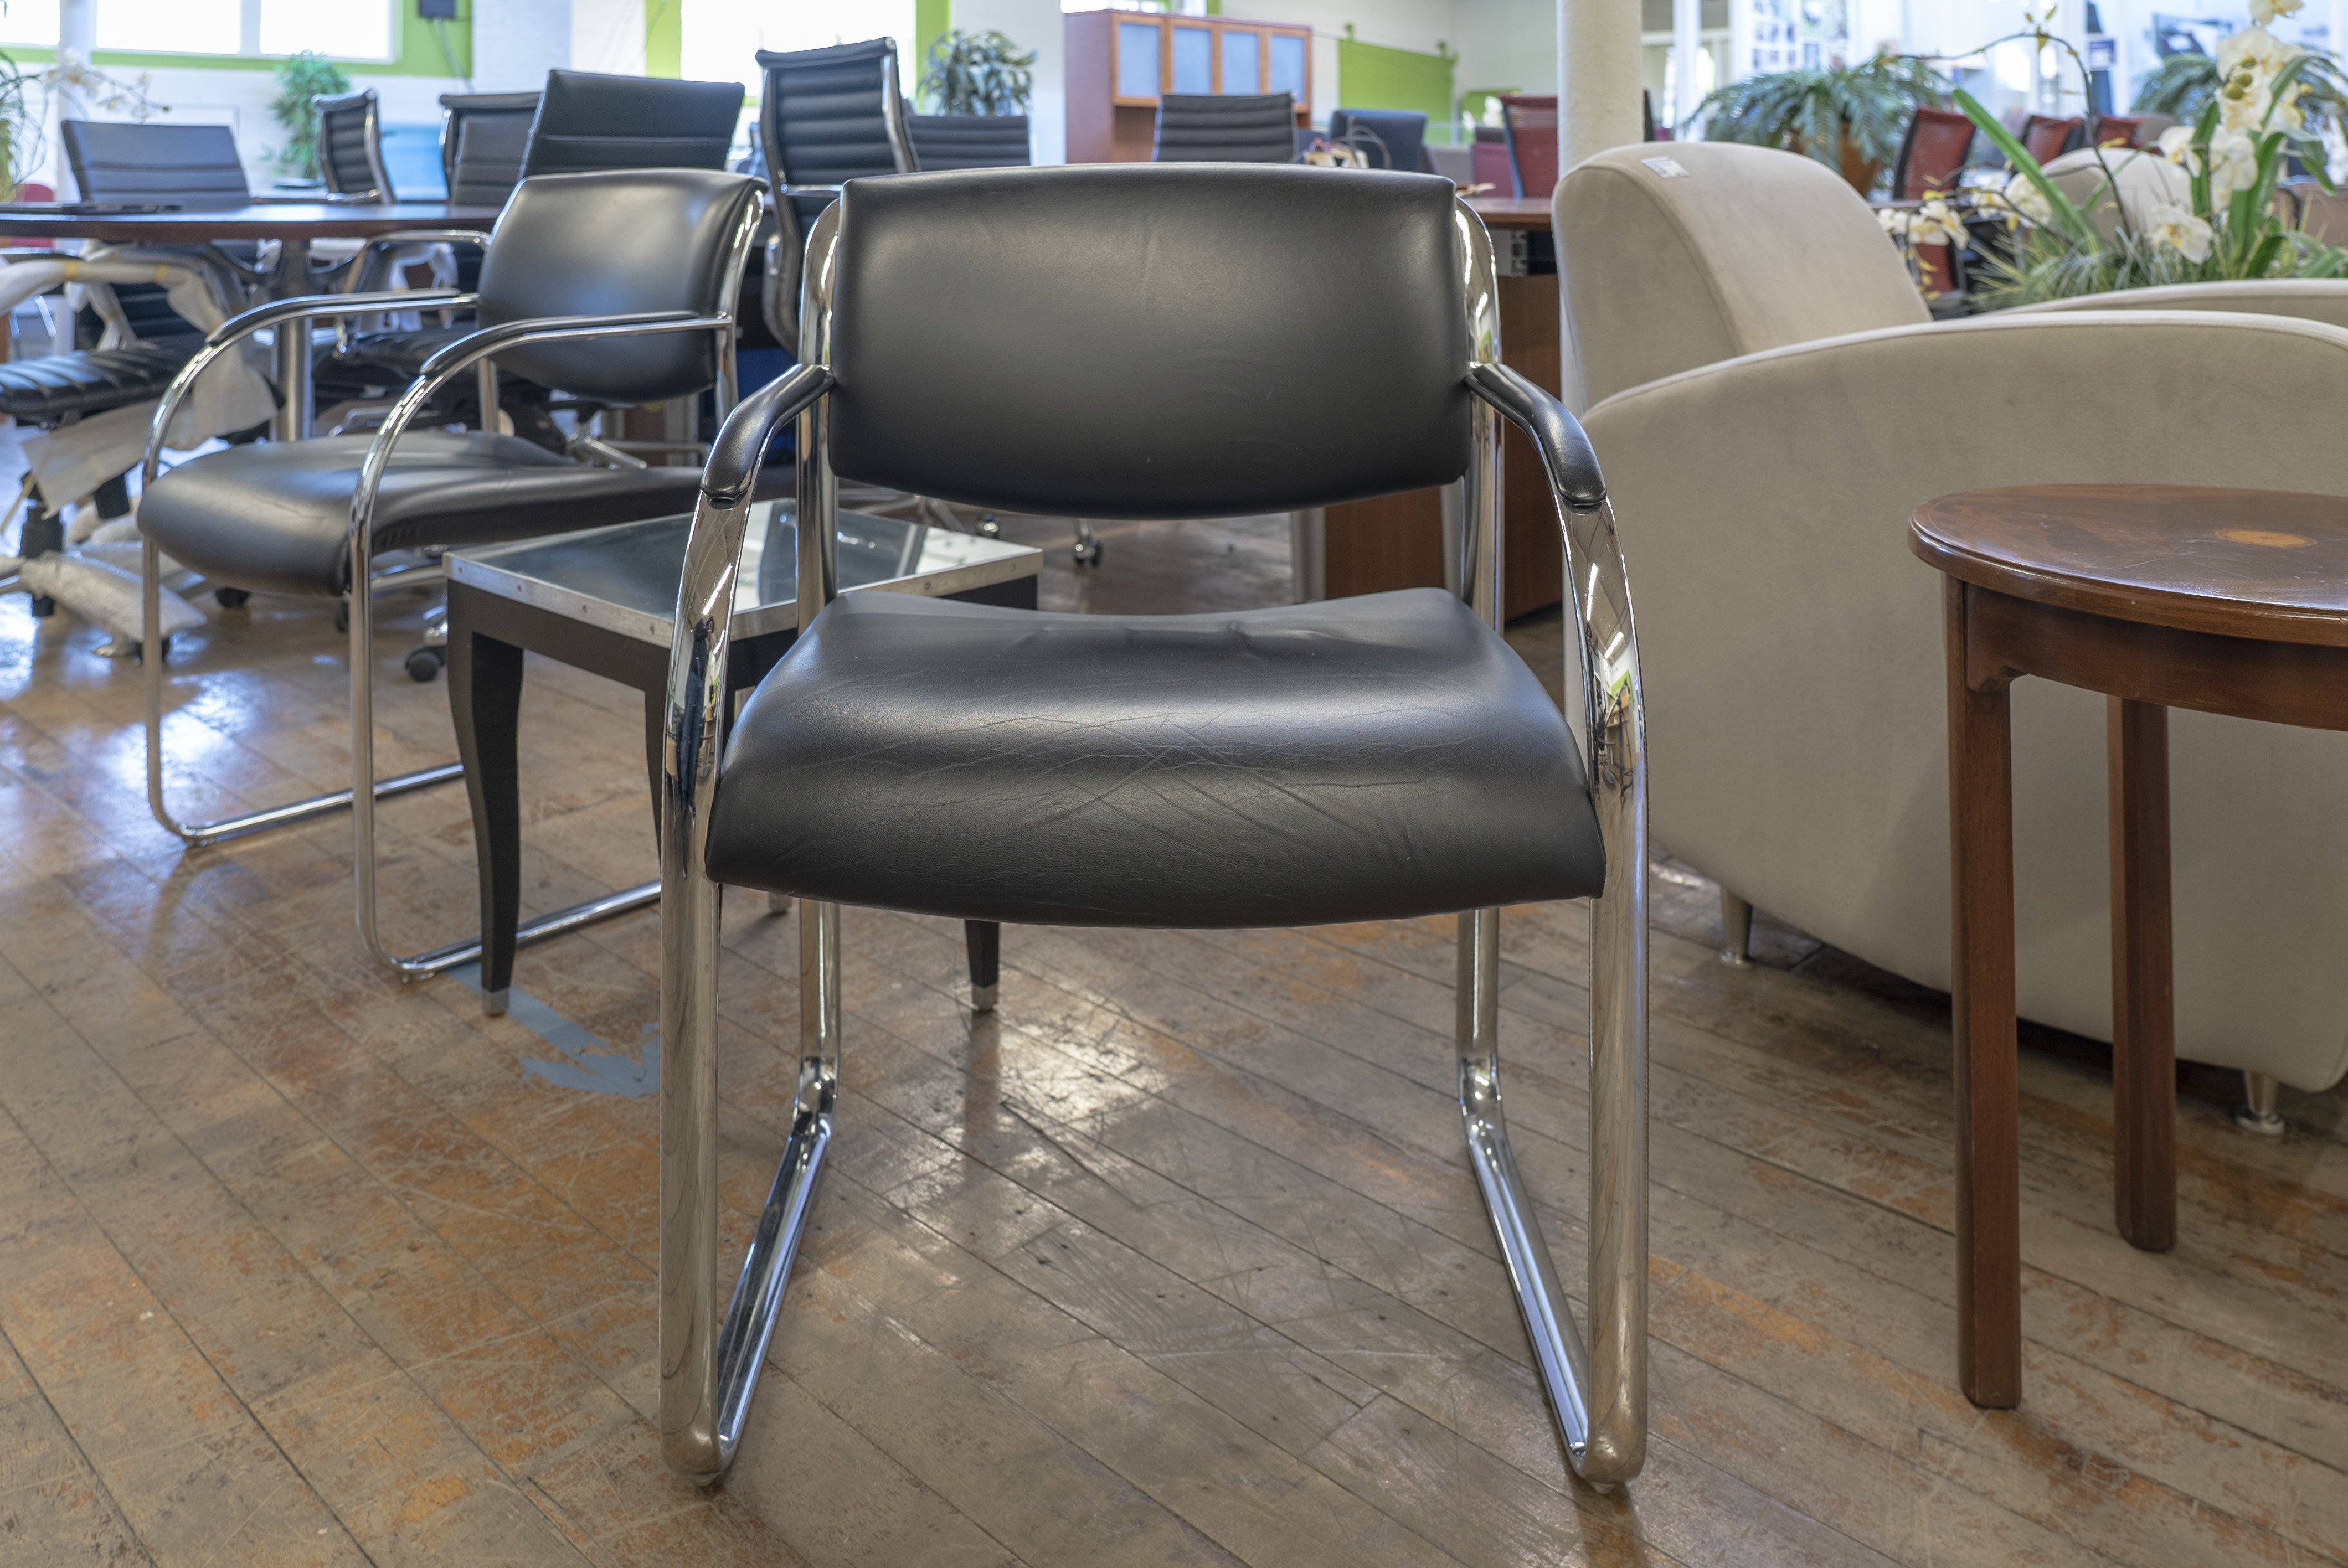 knoll-snodgrass-black-leather-chairs